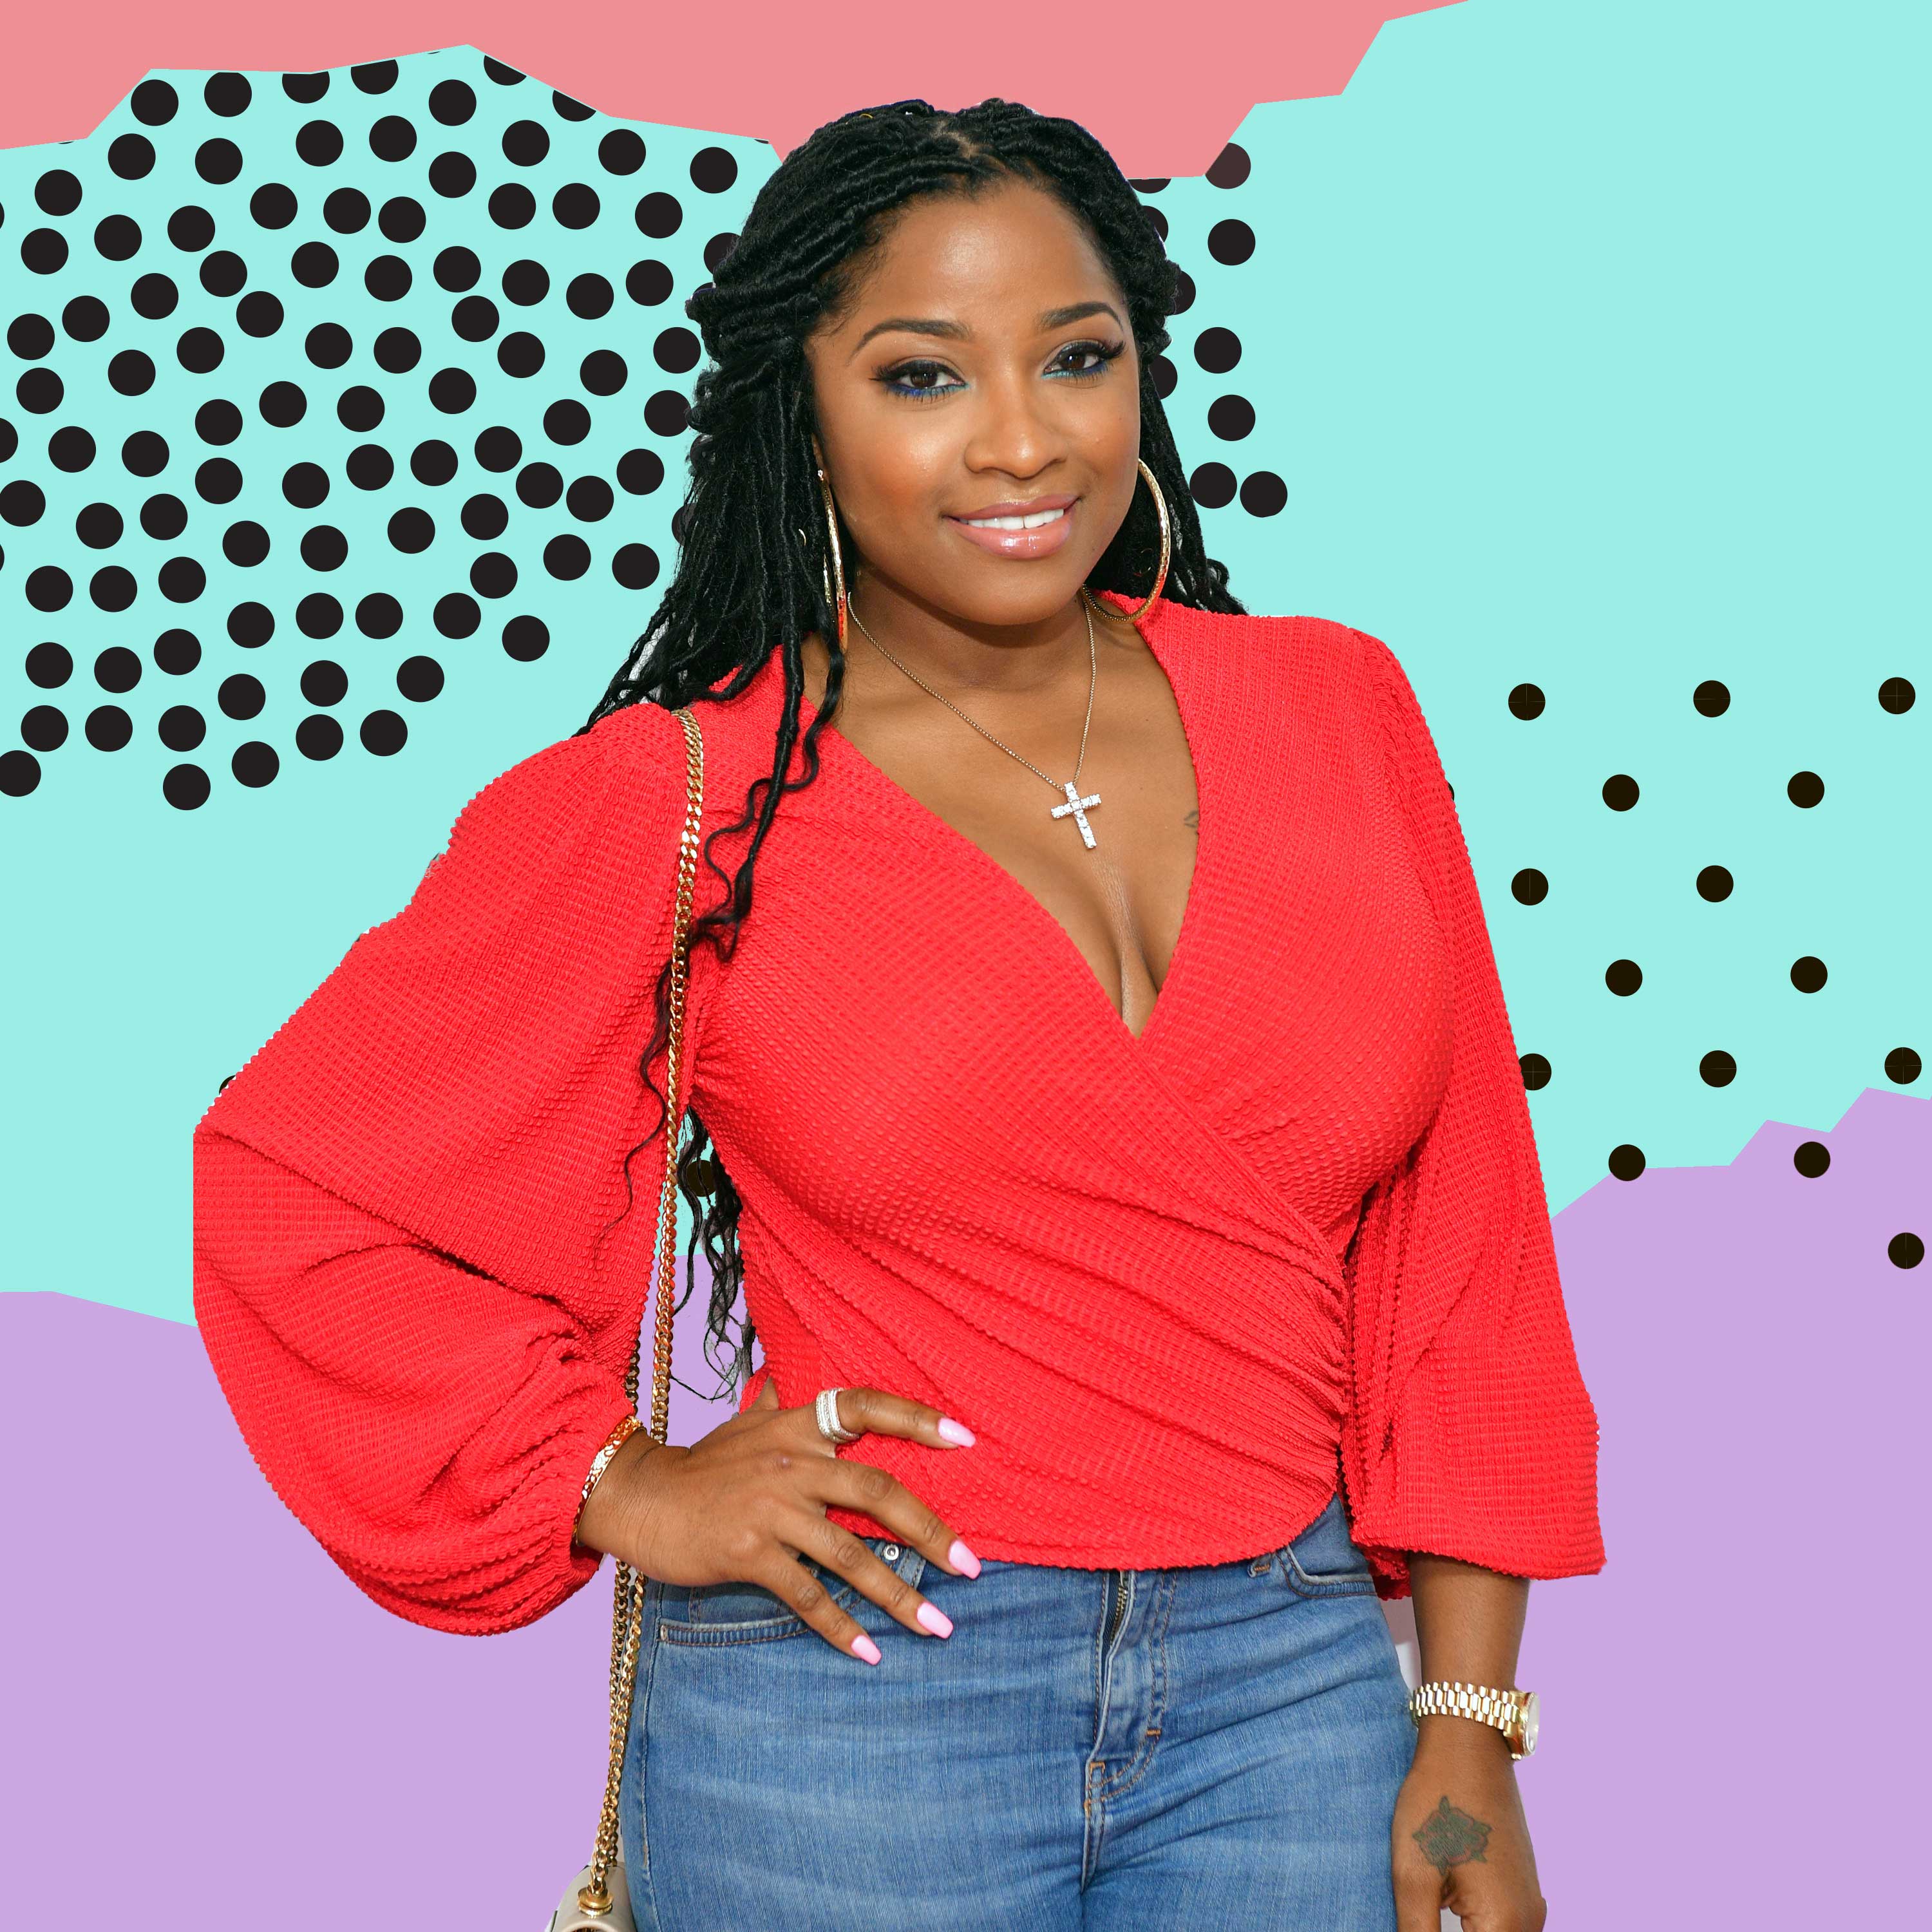 Toya Wright’s Daughter Reign Is Living Her Best Life In Adorable Spa Photos